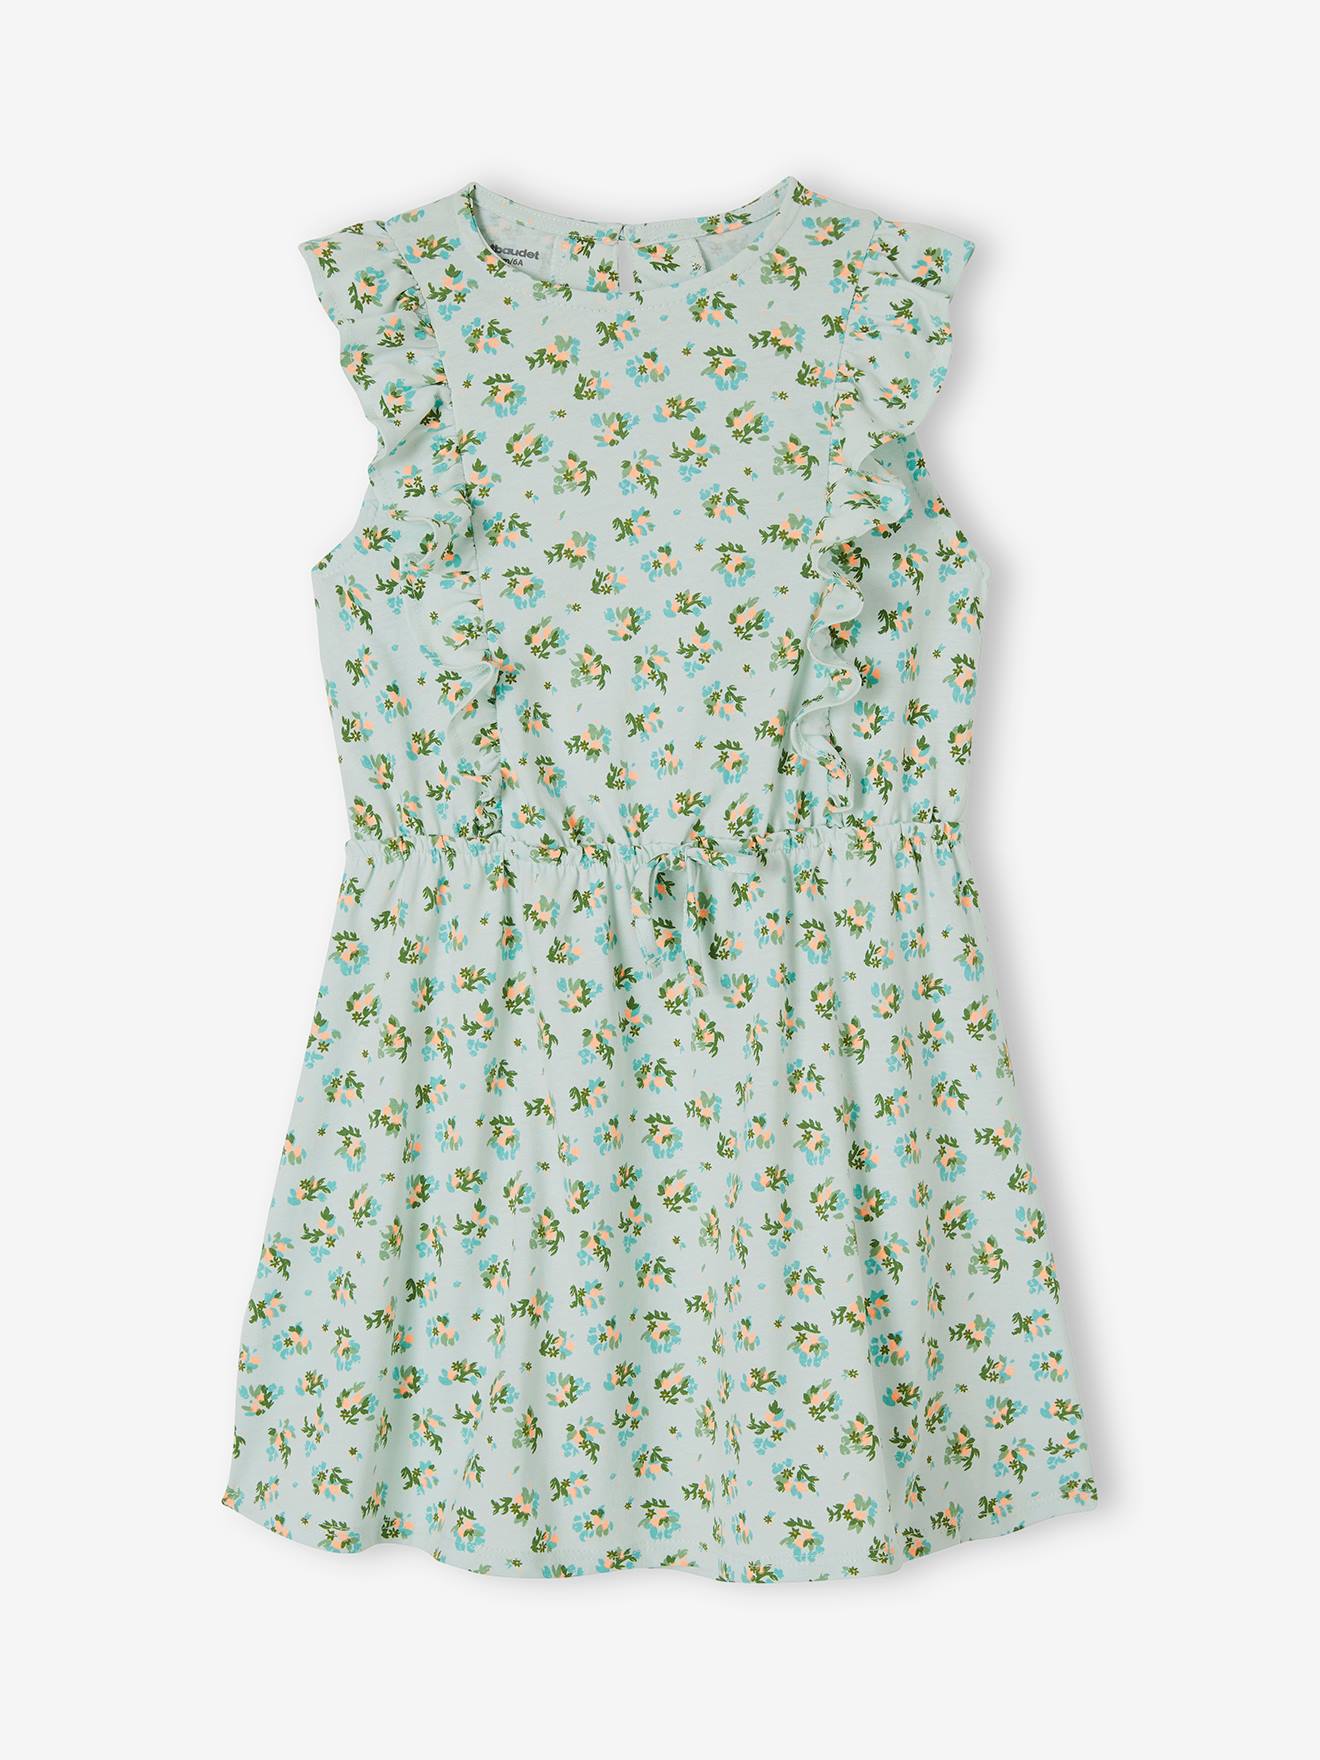 Printed Dress with Ruffles for Girls sky blue